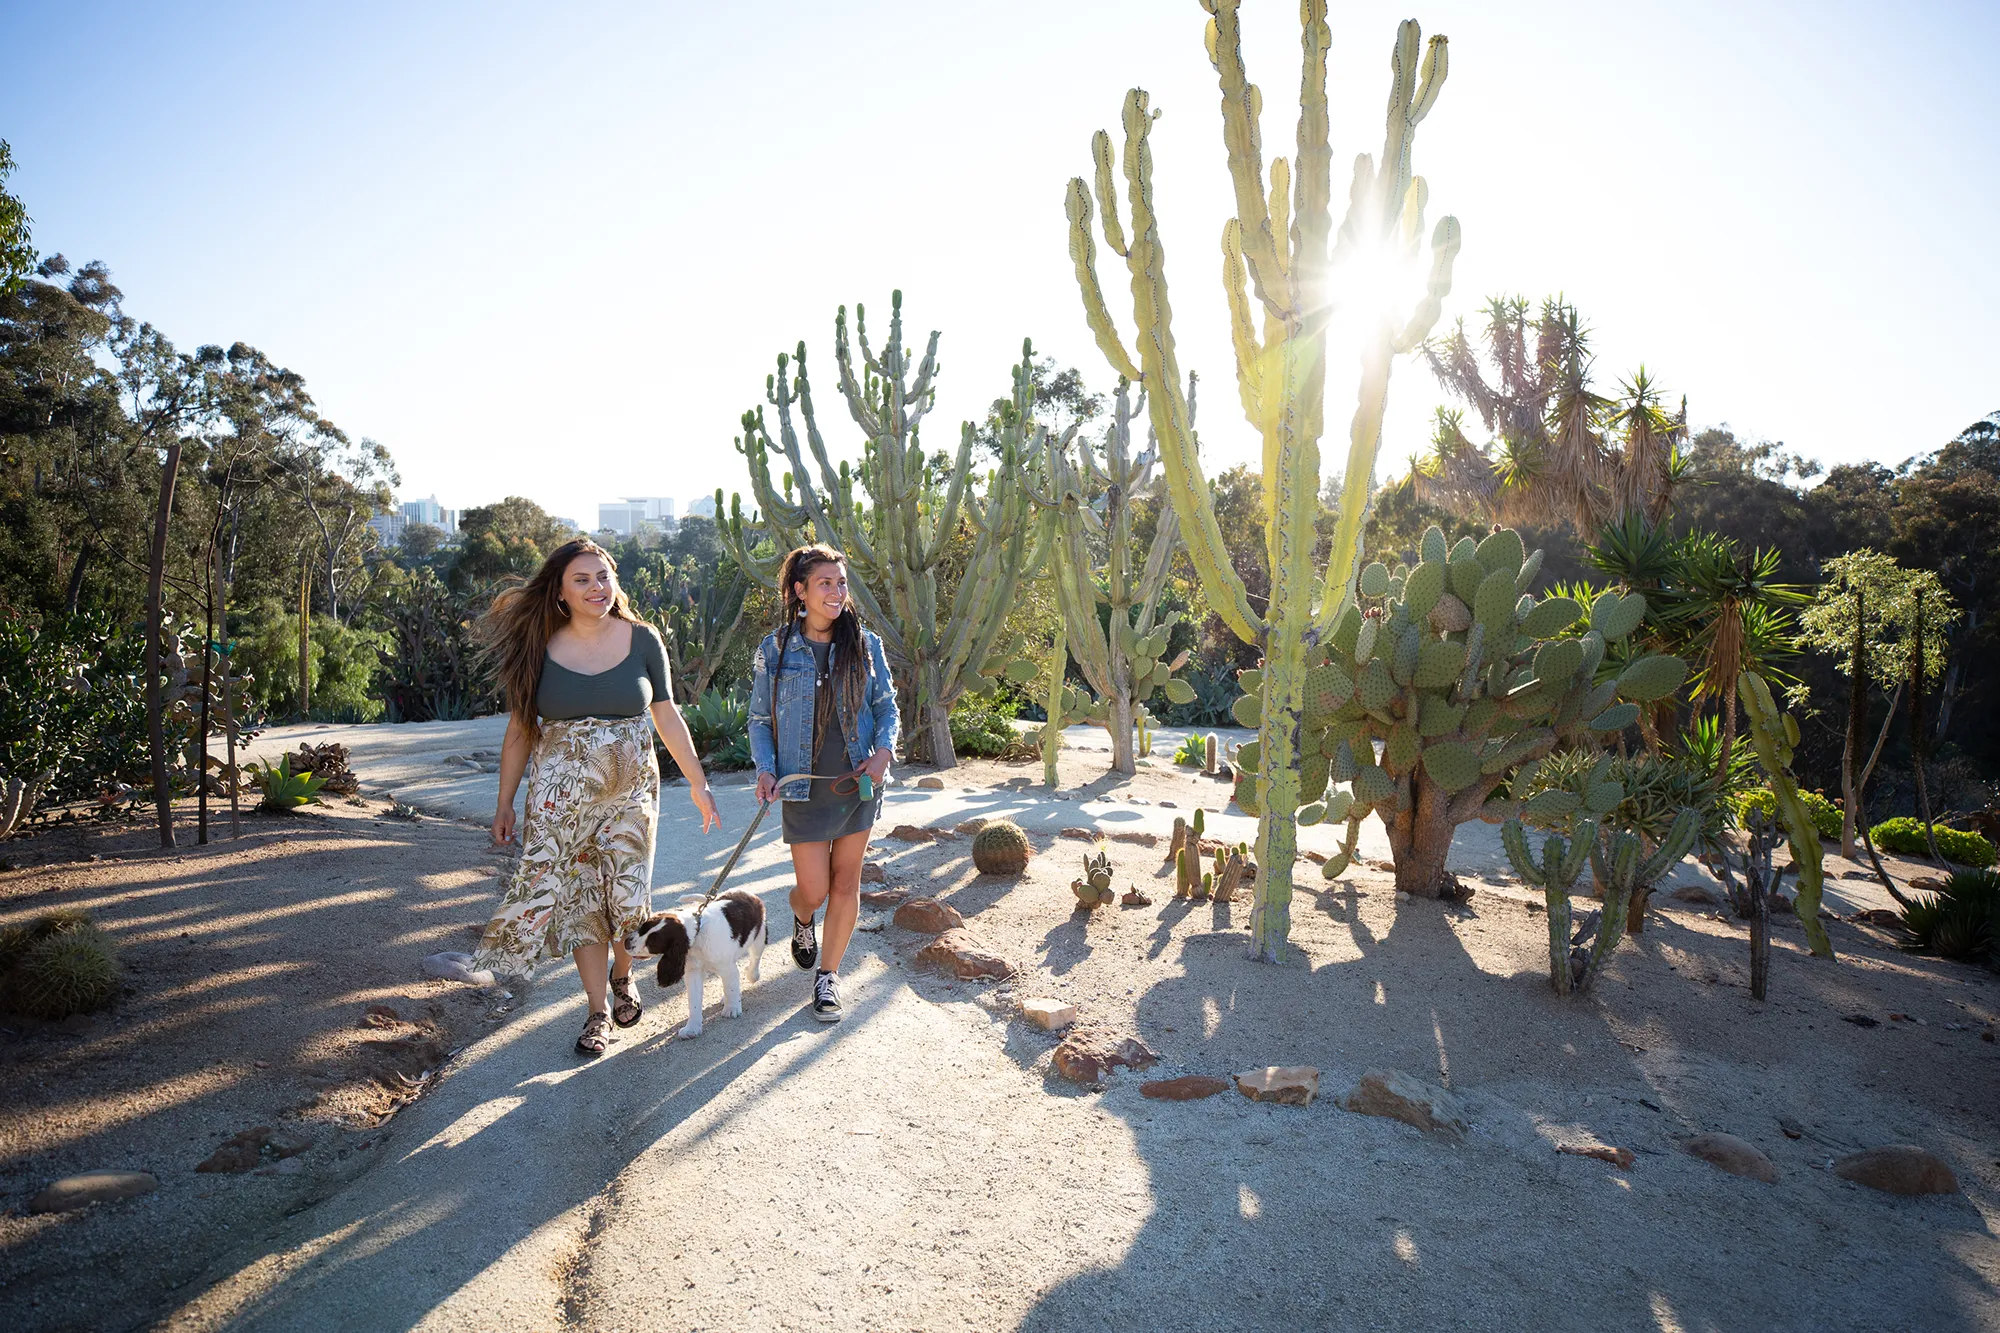 A young girl with brown hair and wearing a green and floral dress walking next to a young woman with brown hair walking a brown and white dog on a trail with cacti